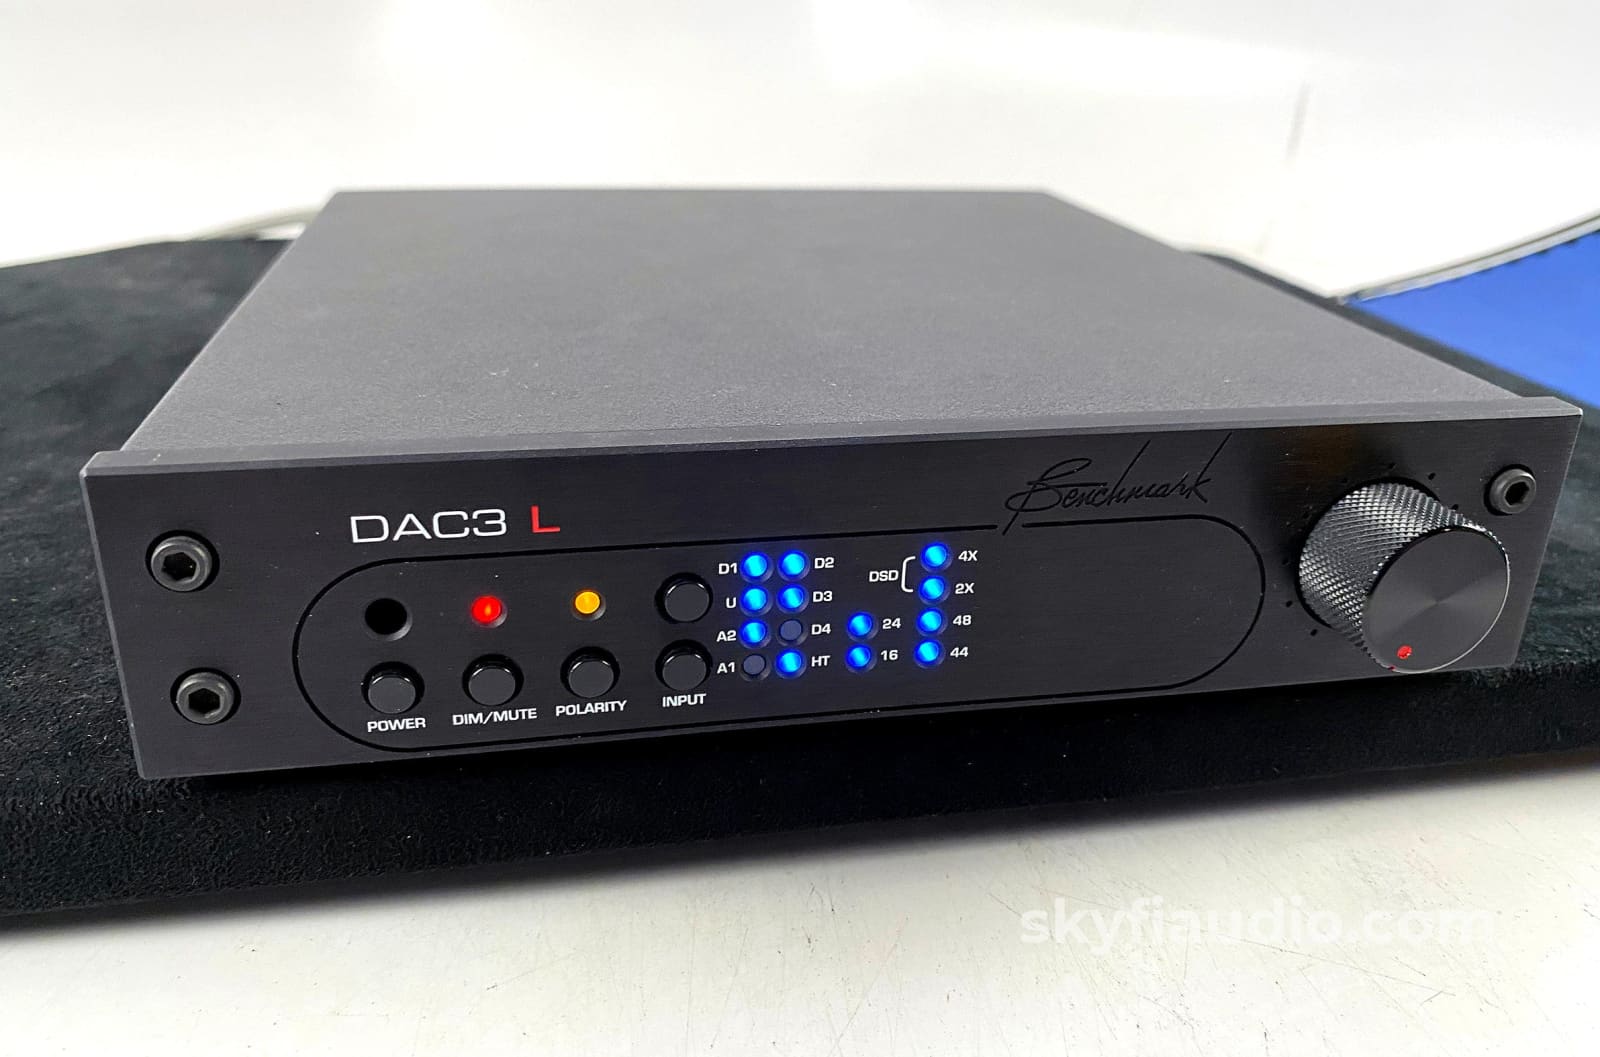 Benchmark Dac3 L - Dsd Reference Quad-Balanced 32-Bit Dac And Preamp With Remote Cd + Digital